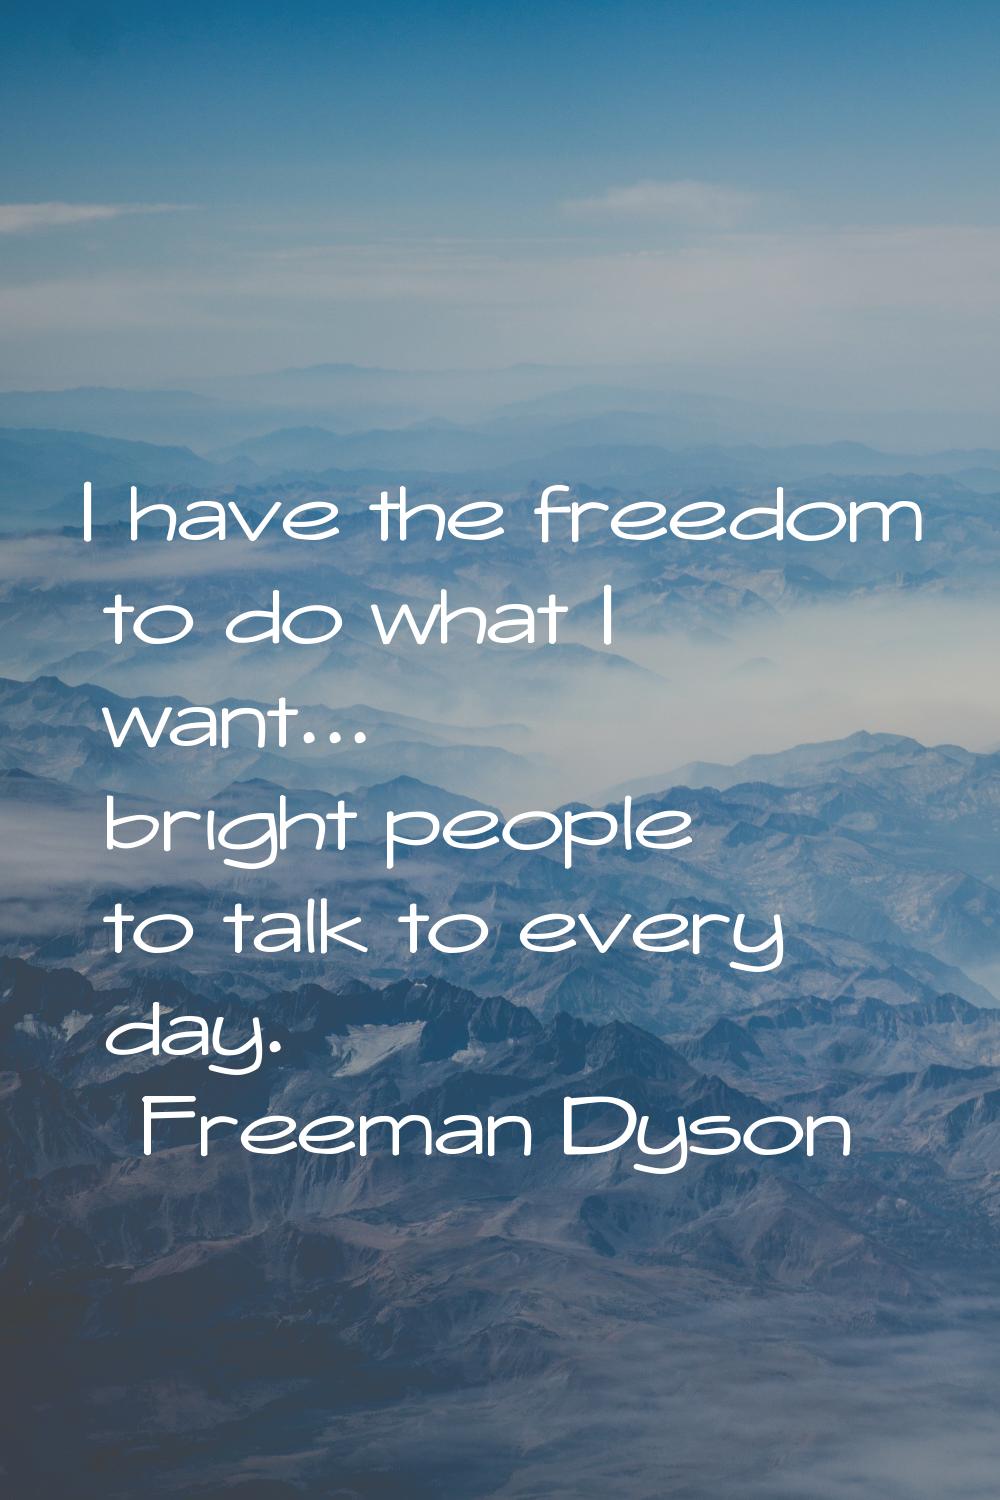 I have the freedom to do what I want... bright people to talk to every day.